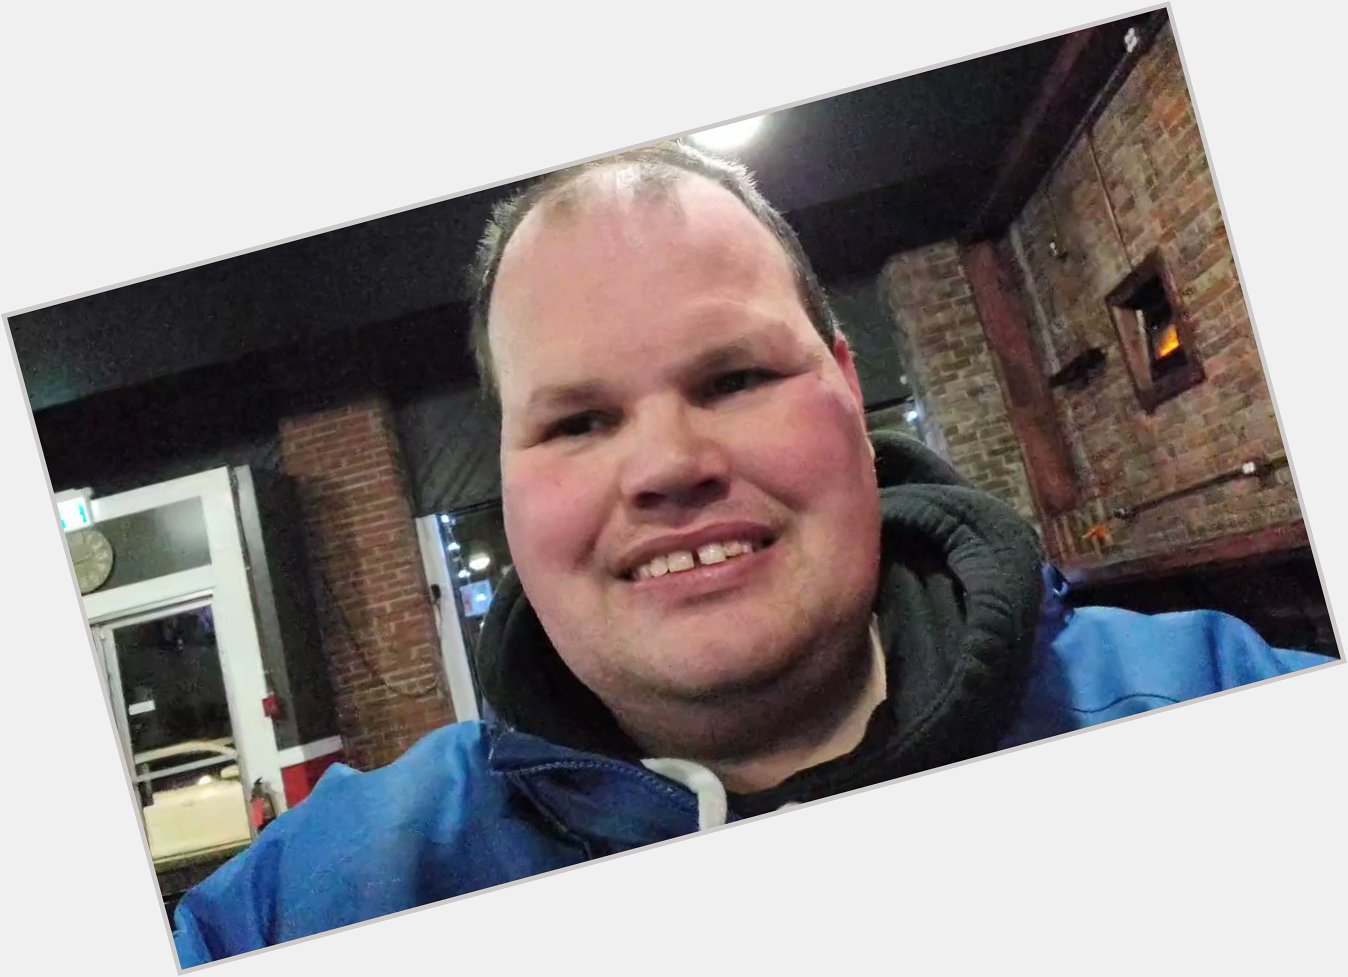  Happy Birthday Jennifer Aniston and have a great birthday from Frankie MacDonald 